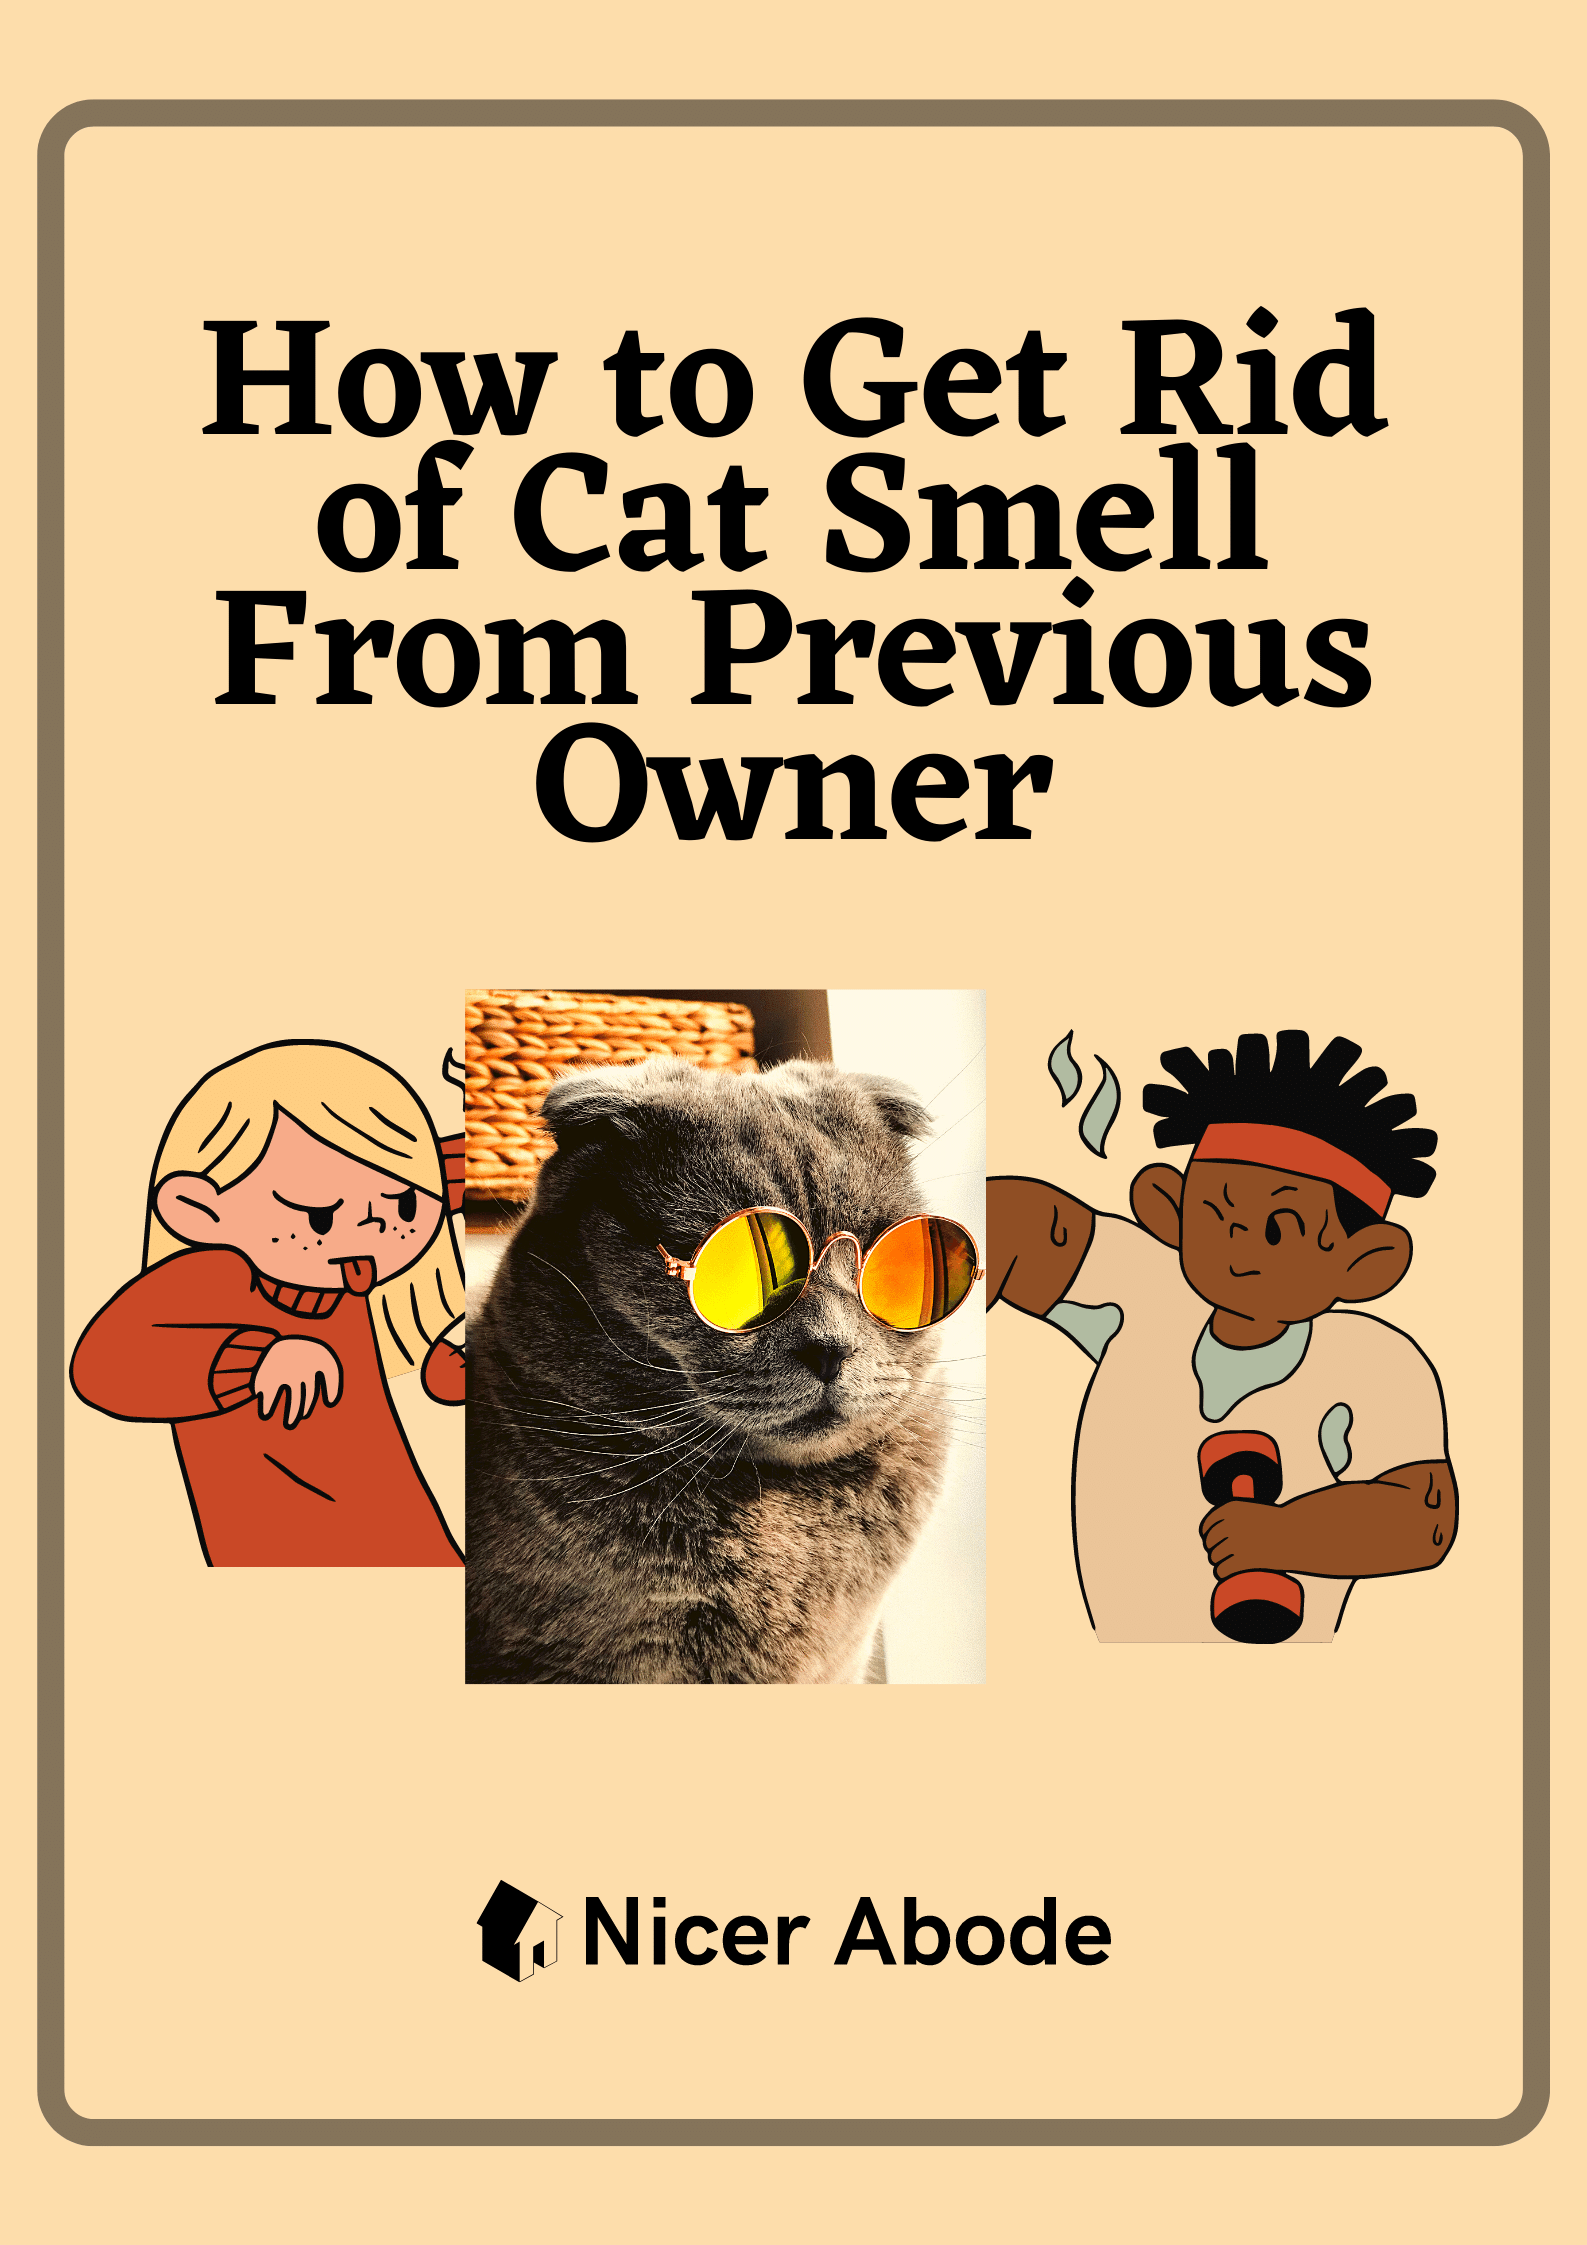 How-to-Get-Rid-of-Cat-Smell-From-Previous-Owner